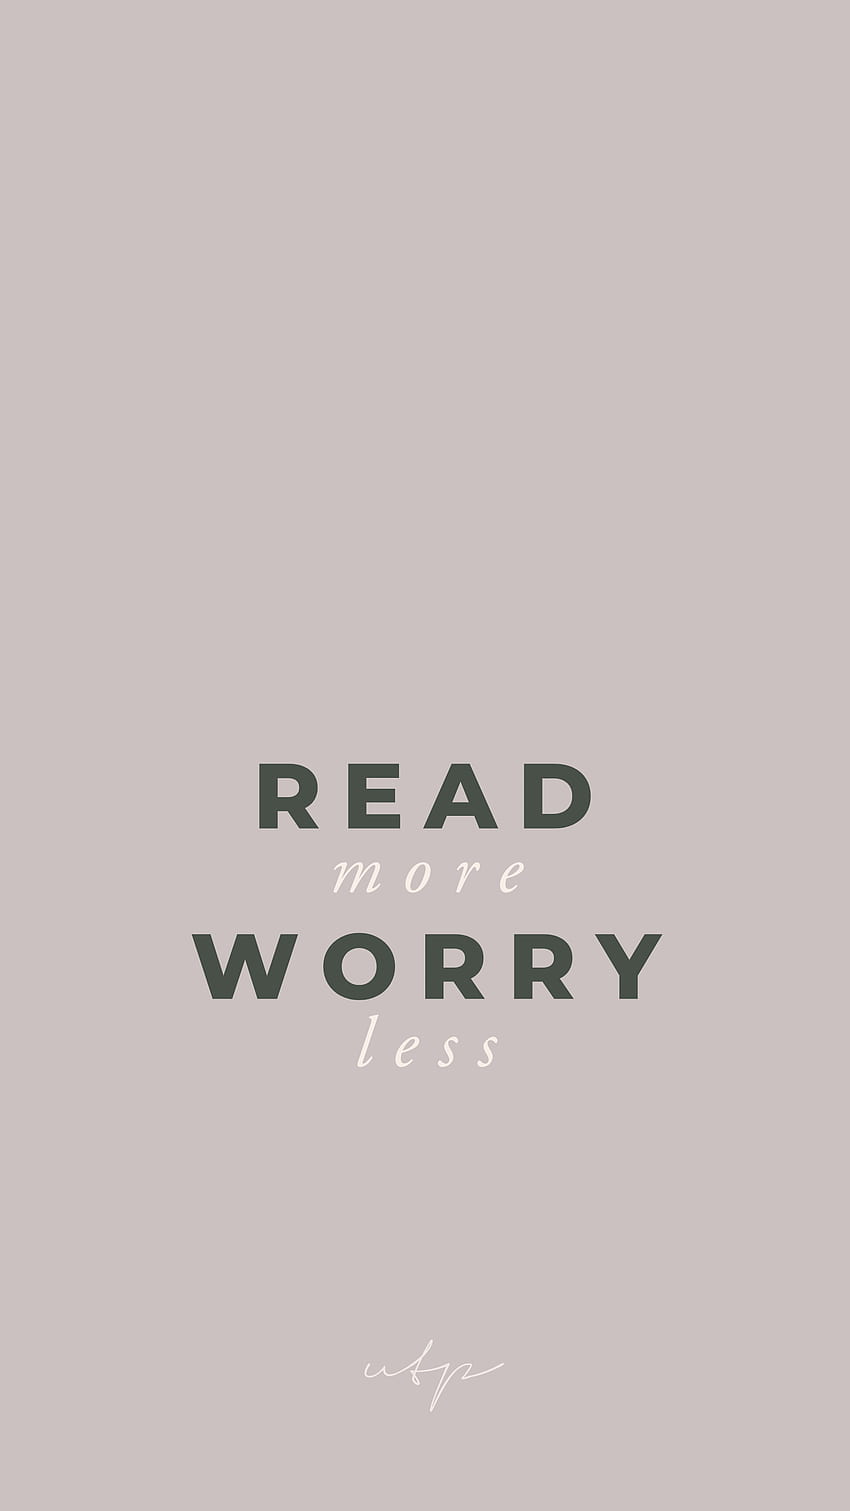 READ MORE WORRY LESS PHONE . Inspirational quotes from books, Bookworm quotes, Reading HD phone wallpaper